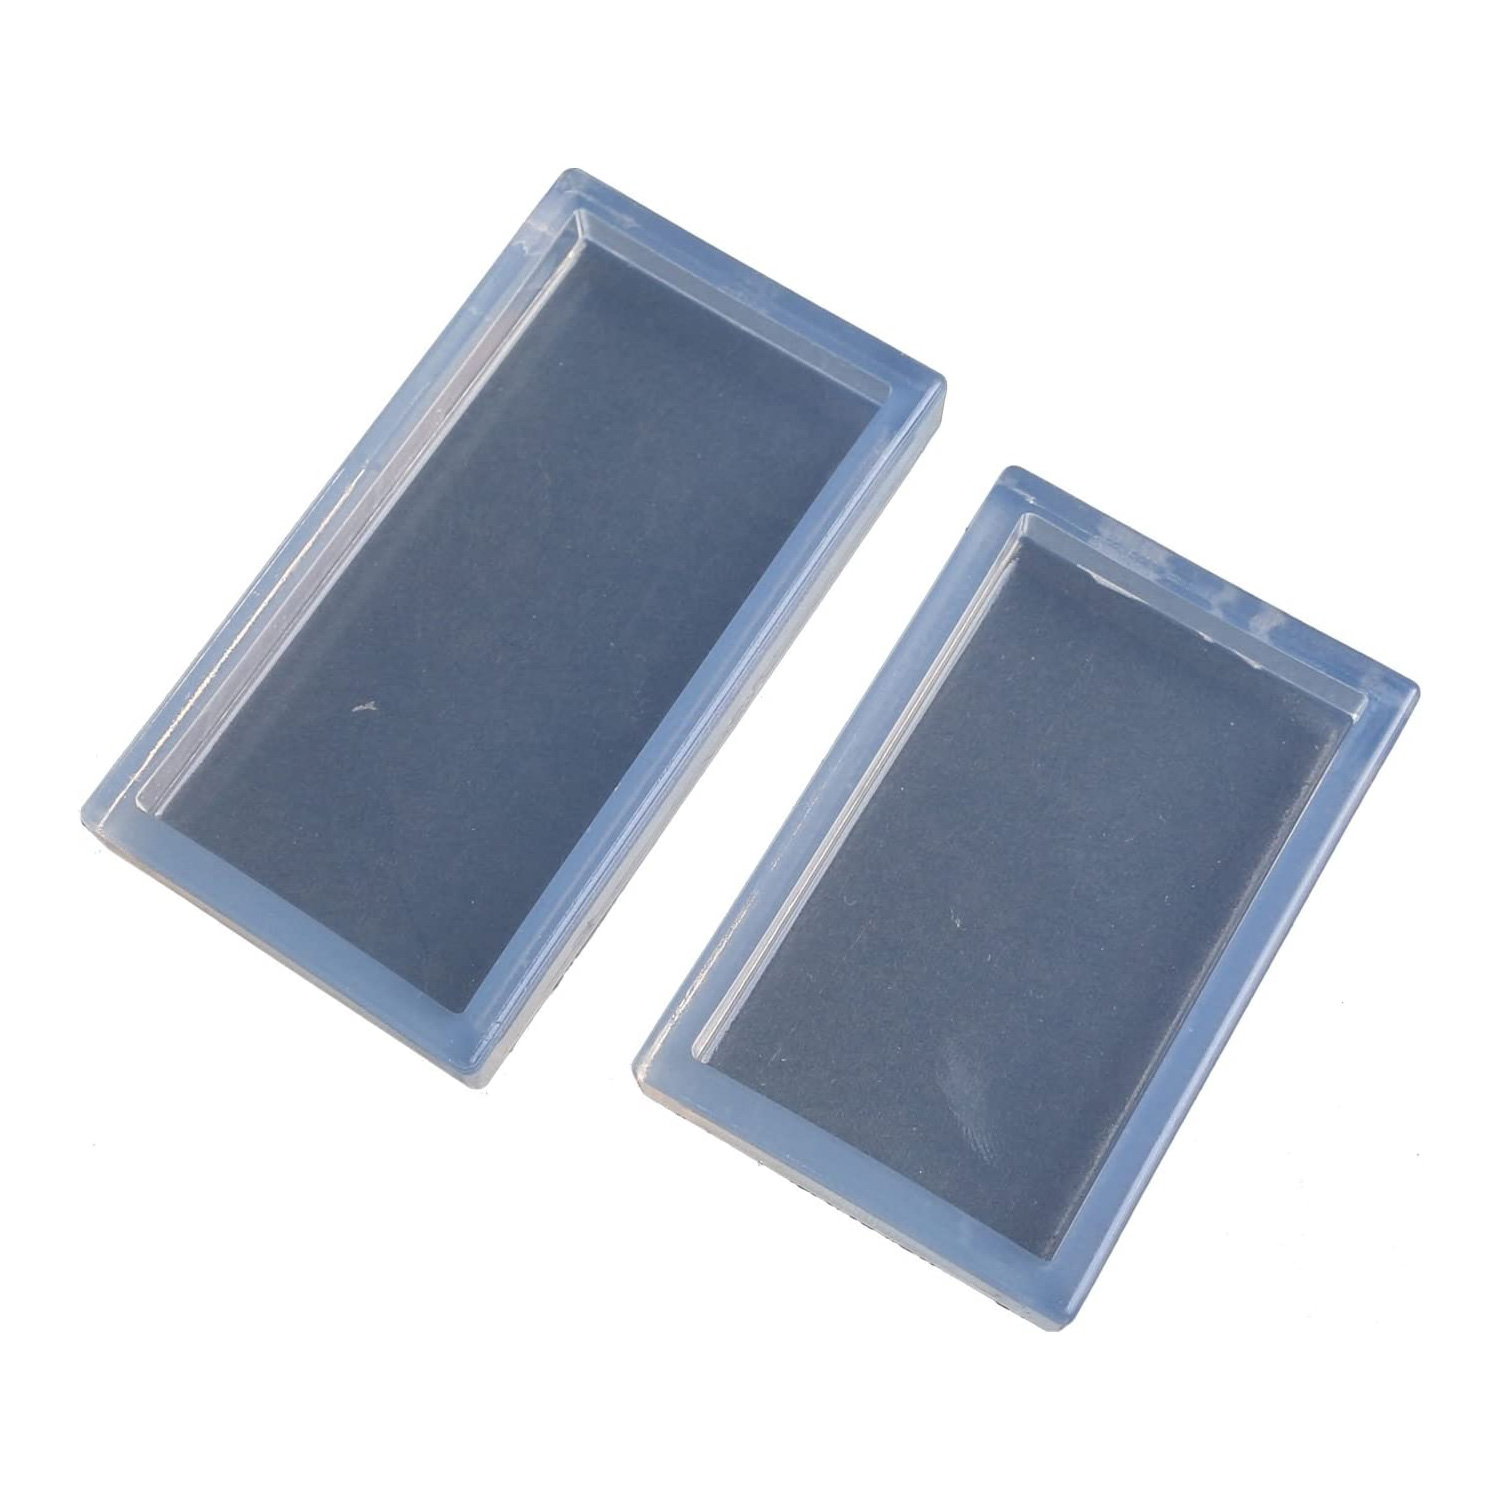 KAM-REJ-542  Resin Crafting Silicone Mold  (pcs)